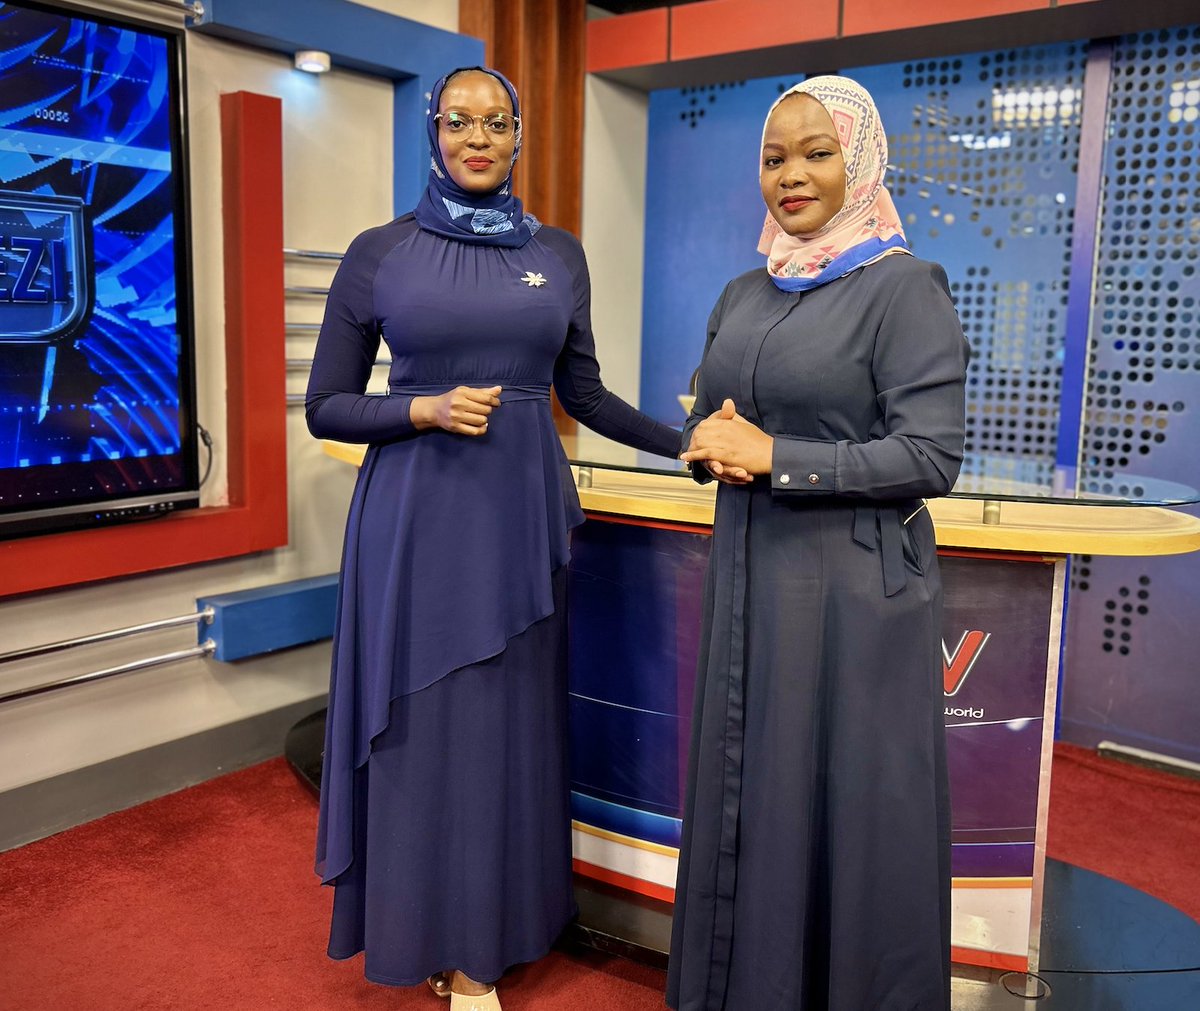 Rita Kanya and Shamim Naiga, delivering the latest news on #NTVNews. Join us for #NTVTonight at 9:00 PM. | Watch online ntv.co.ug